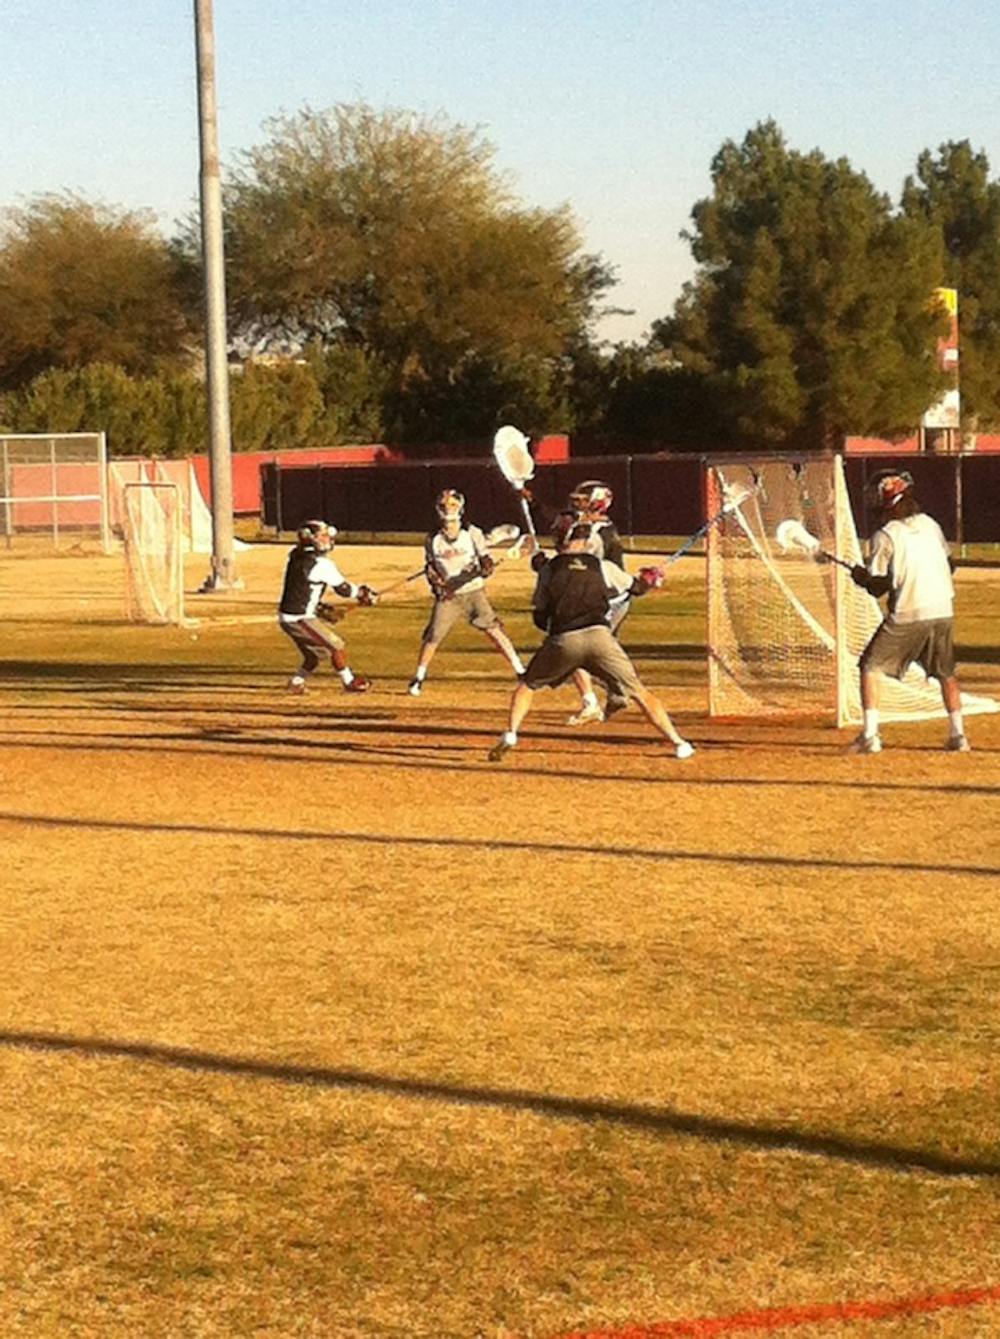 ASU Lacrosse practices on Tuesday, February 26 preparing for the Chapman game. Photo by Nick Krueger